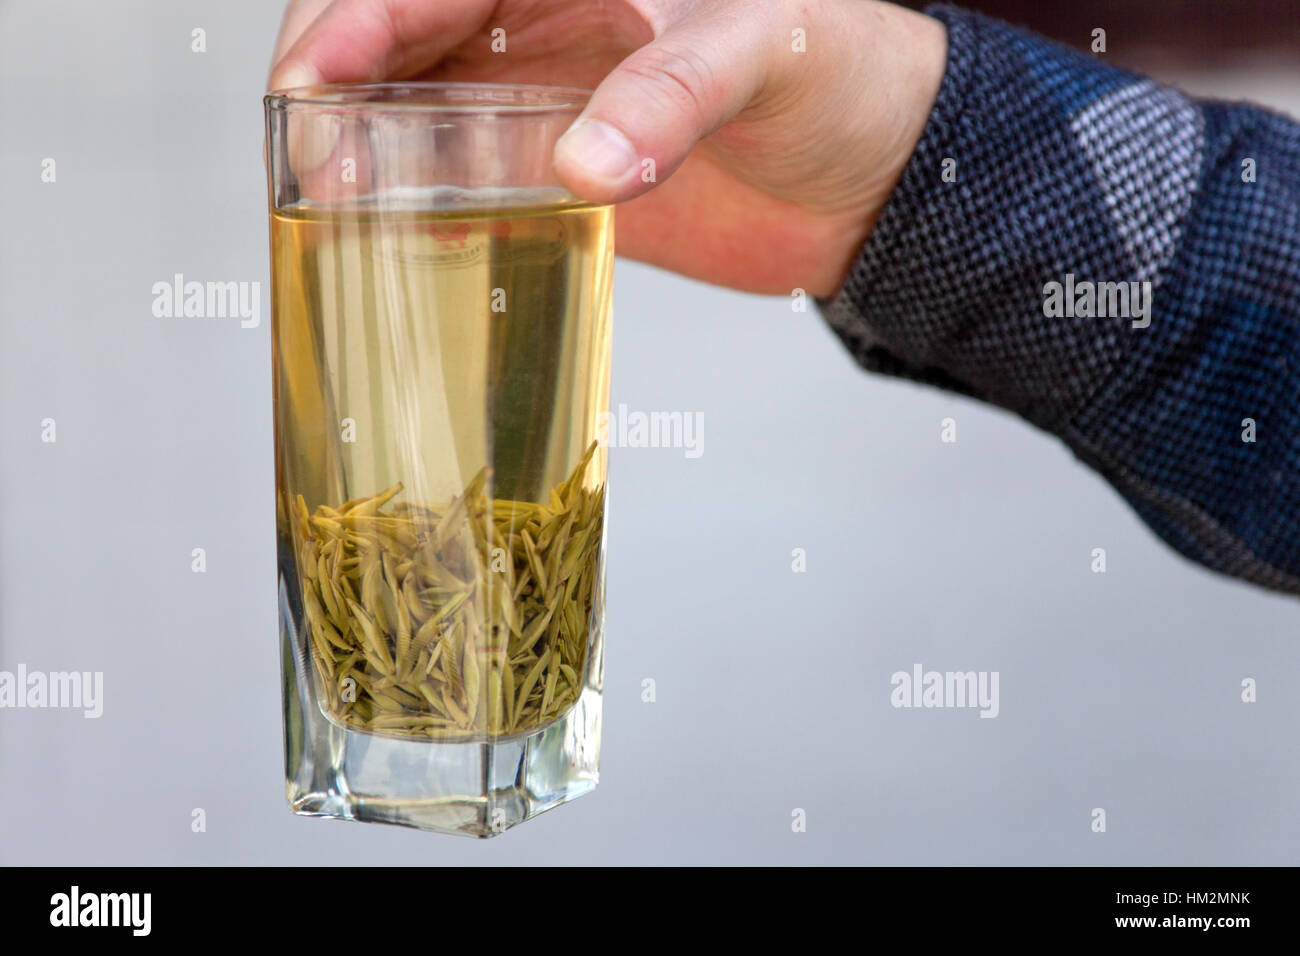 A glass of green tea brewed from tender buds picked during the first tea harvest of the year. Stock Photo